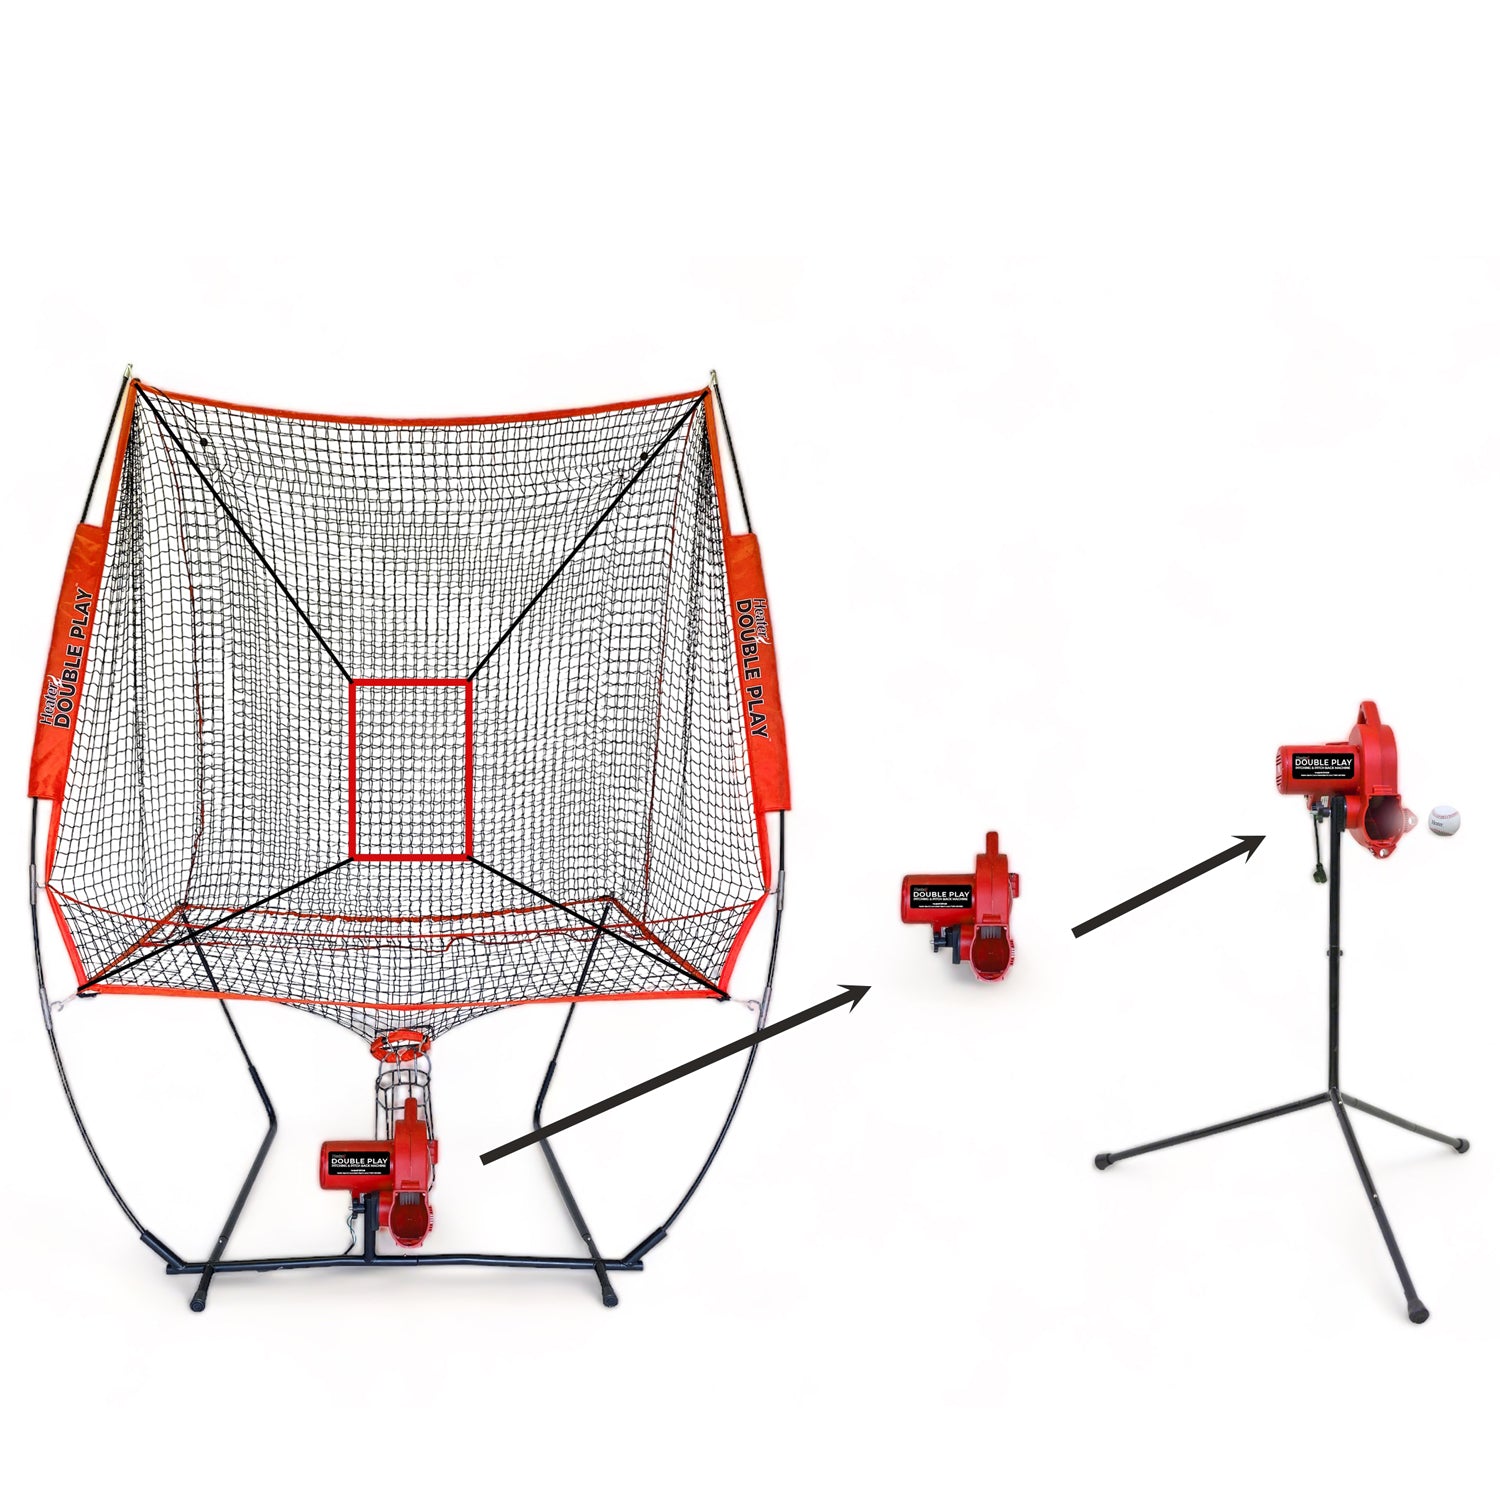 Double Play Pitch Back & Pitching Machine - Baseball Training Tool - 2-in-1 - Fielding & Hitting - Heater Sports - Pitch Machine Pros